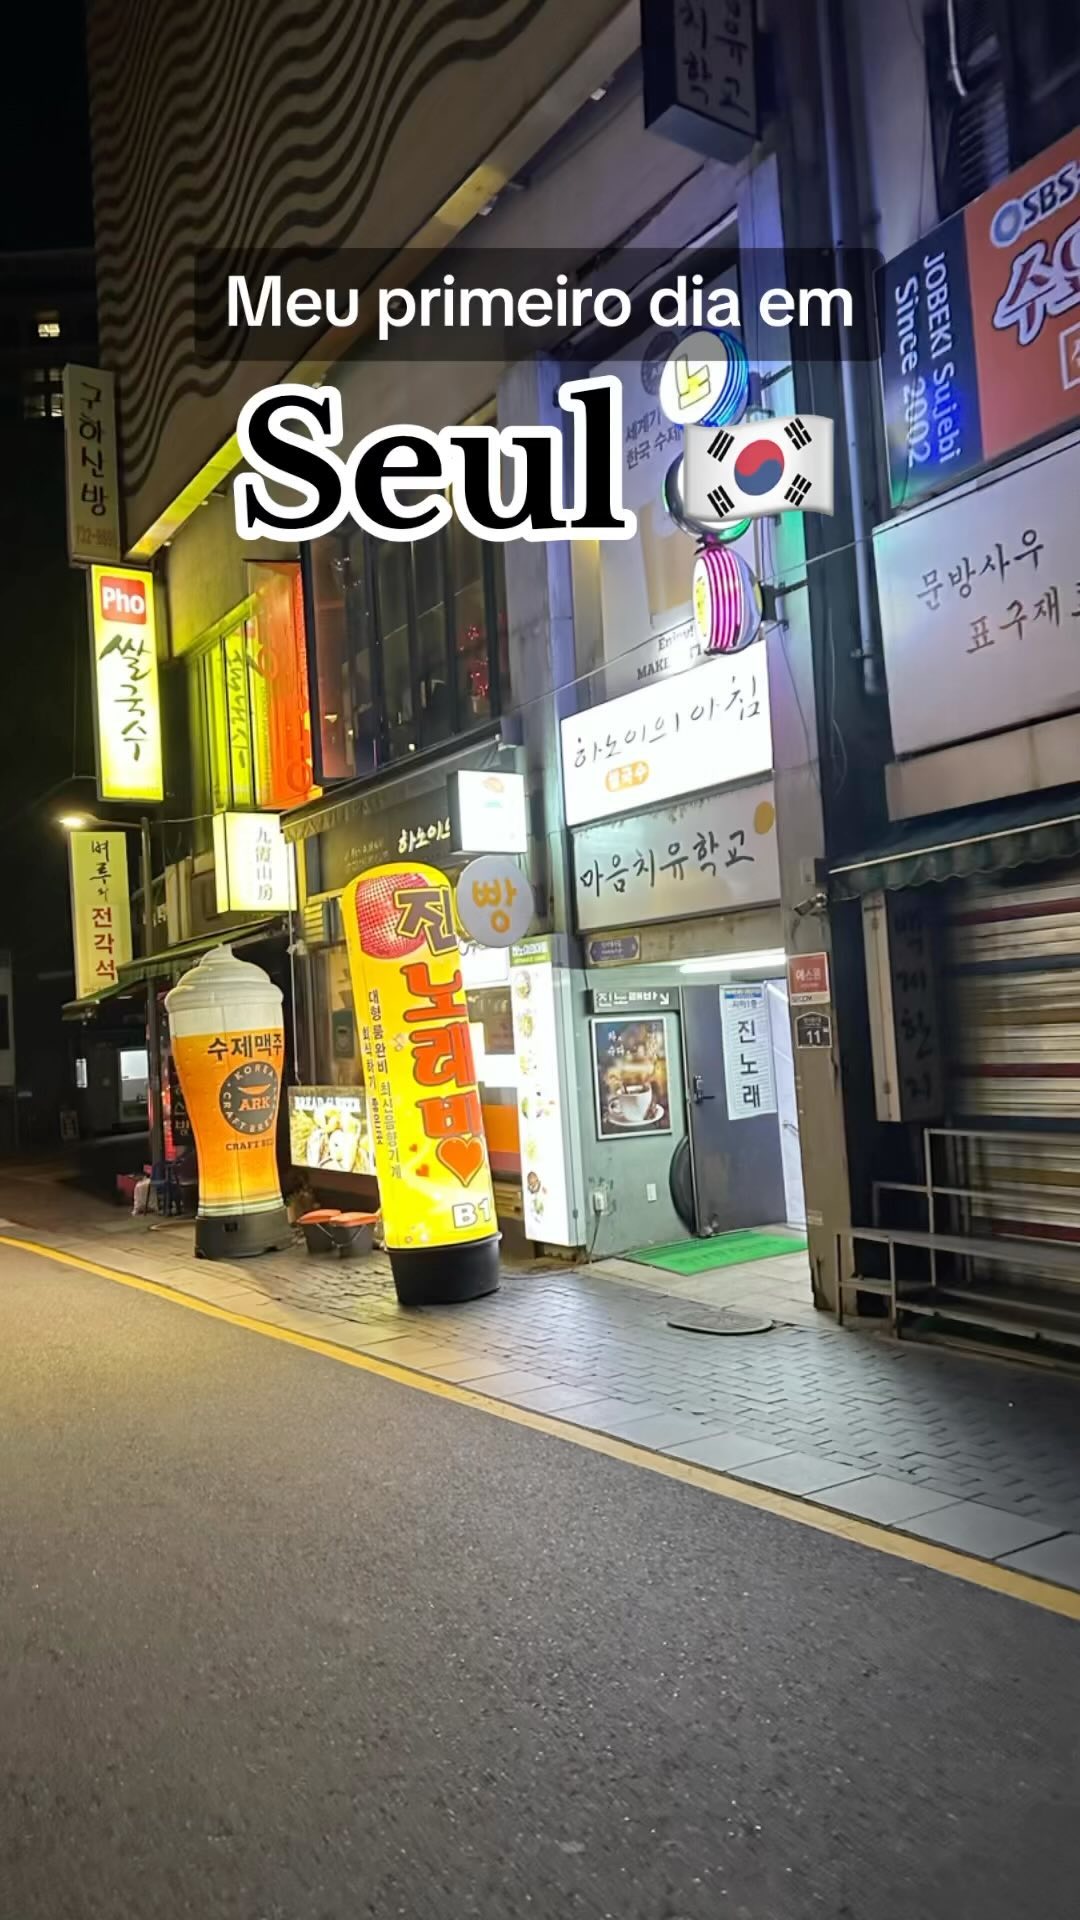 My first day in Seoul 🇰🇷